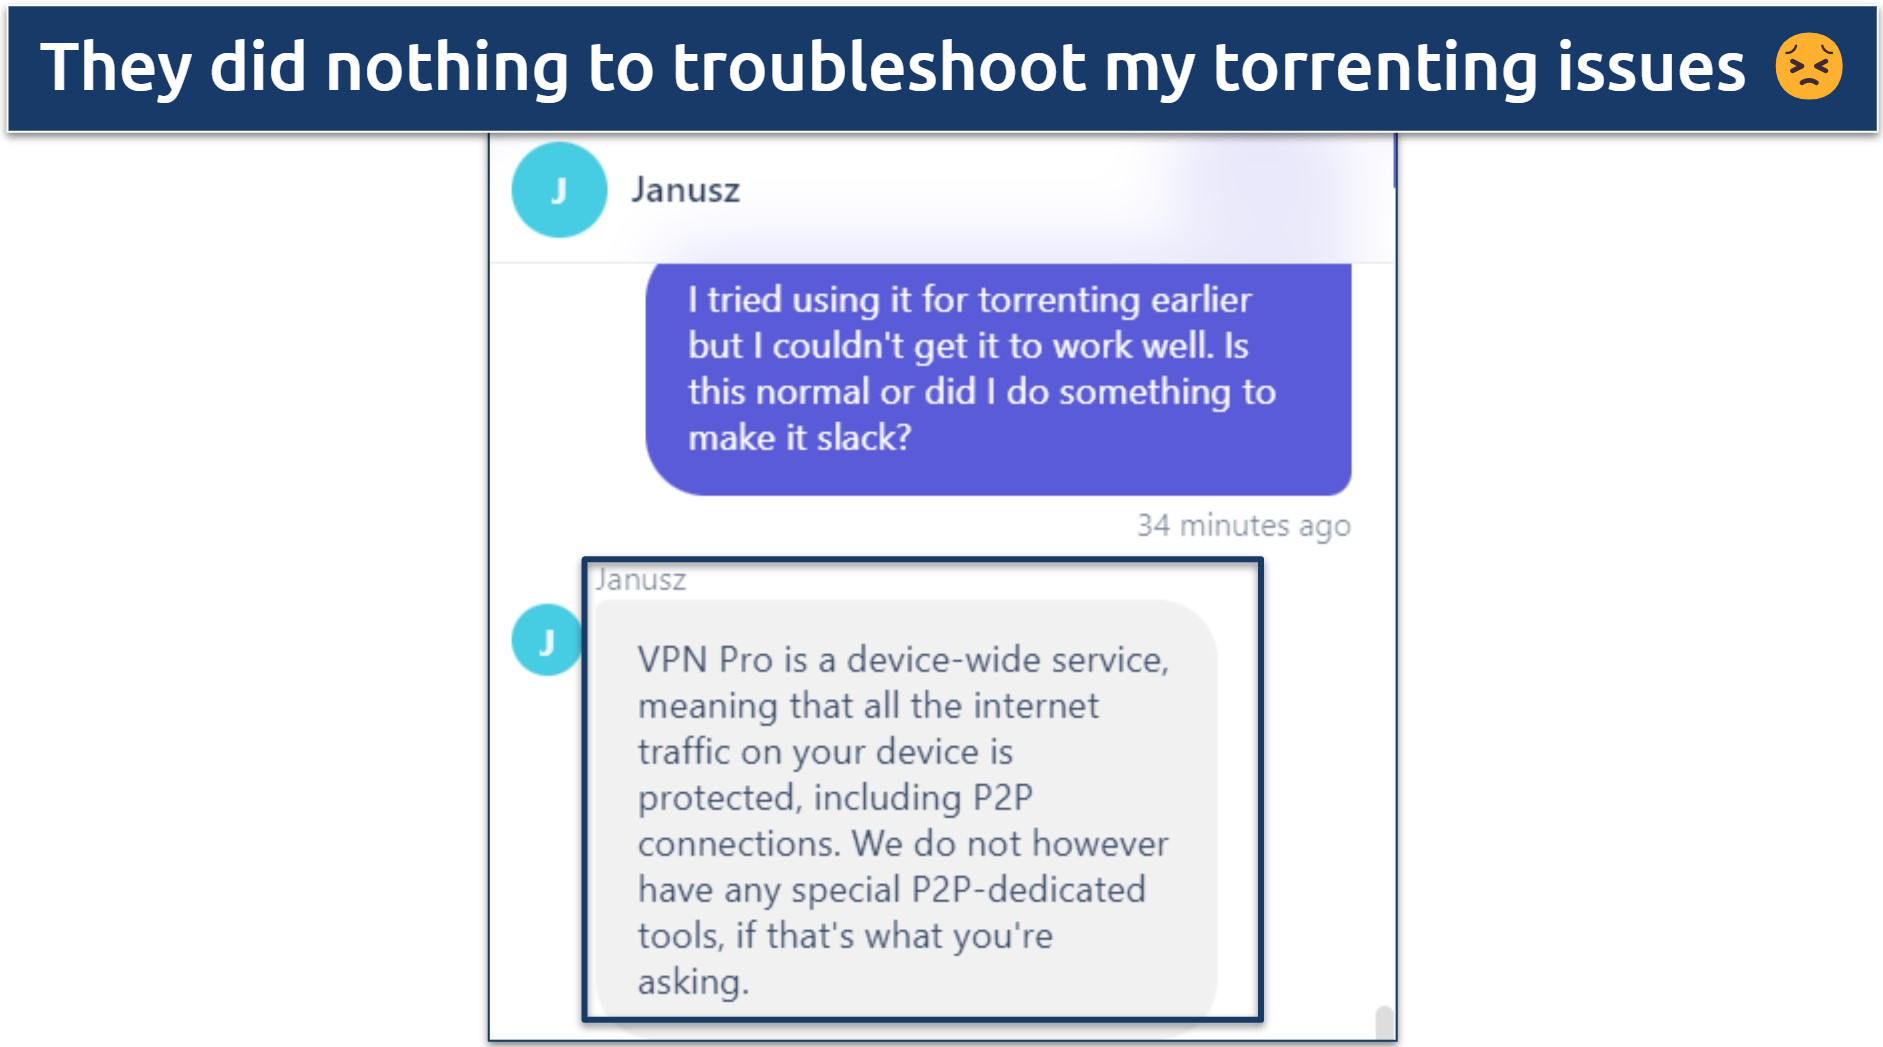 Screenshot of OpenVPN Pro live chat support conversation where I asked how to make it work for torrenting and they couldn't help 